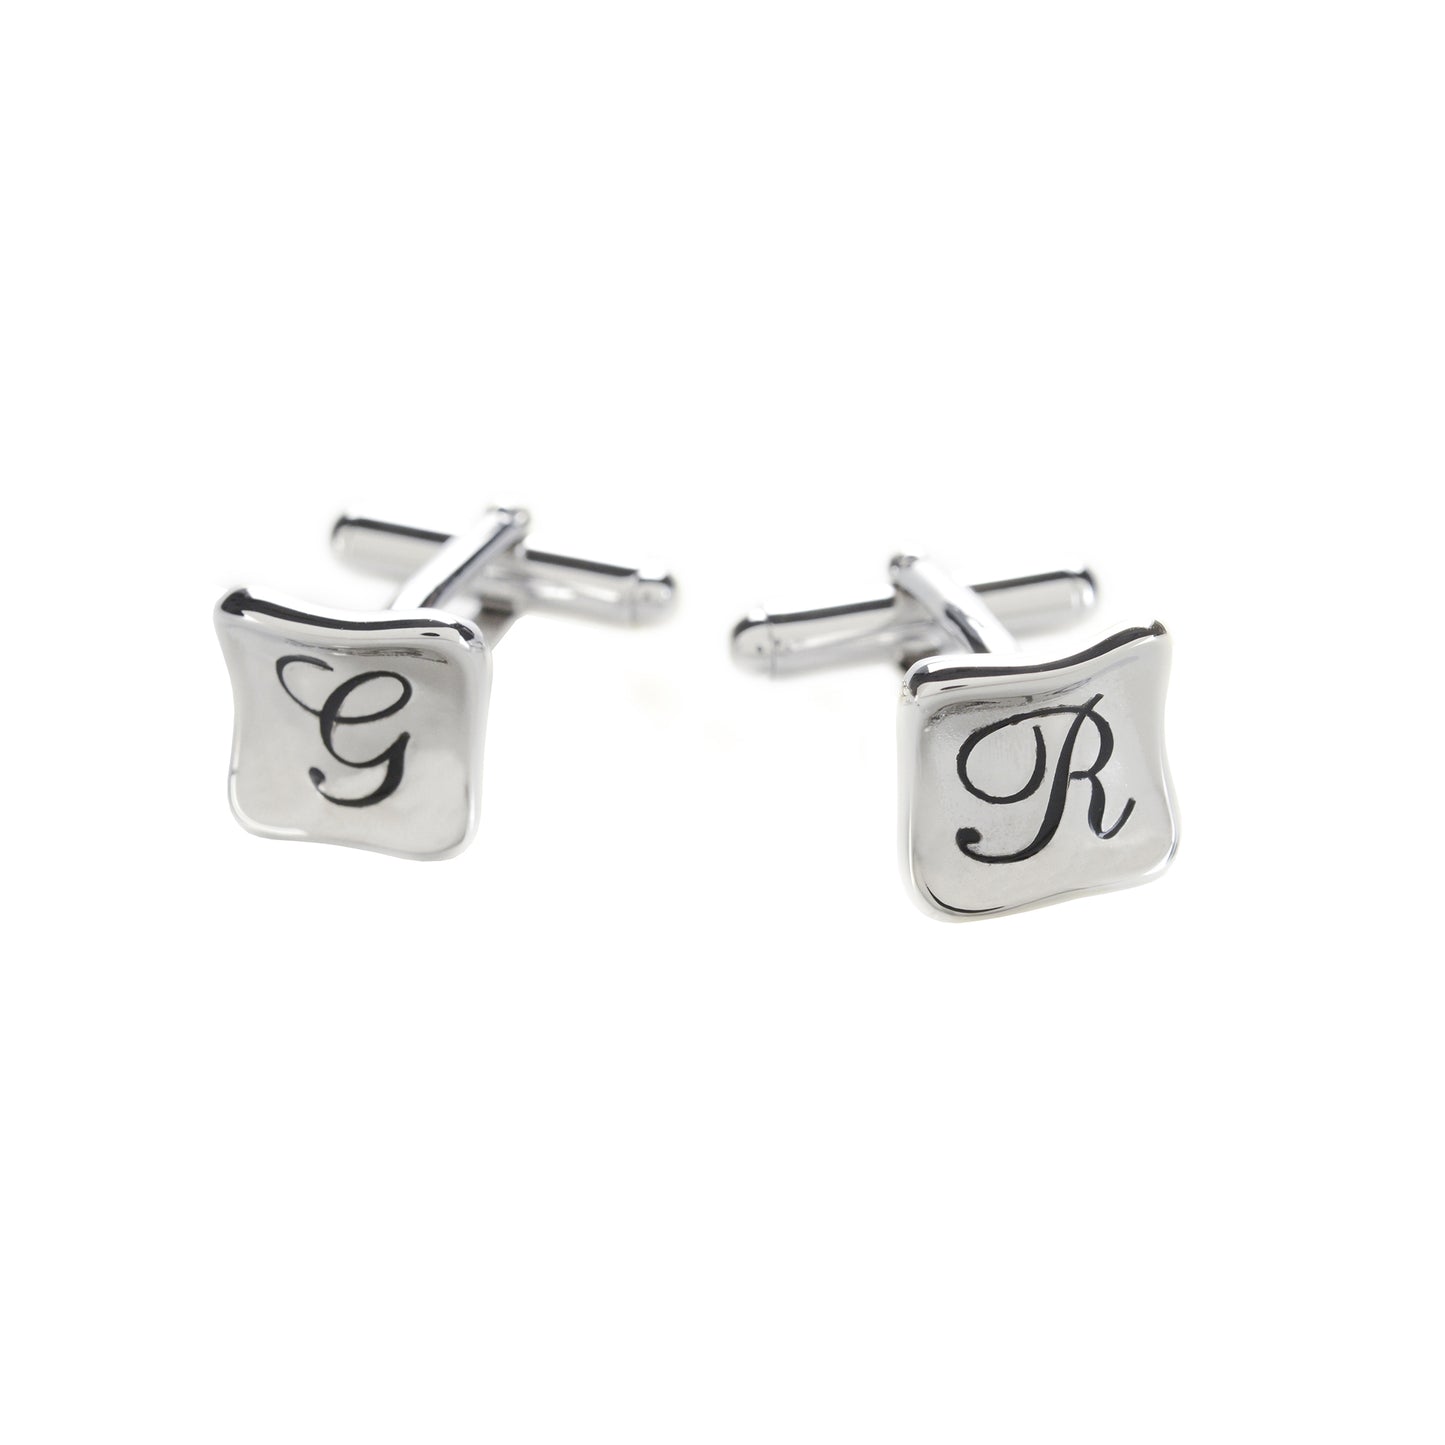 Square cufflinks in sterling silver